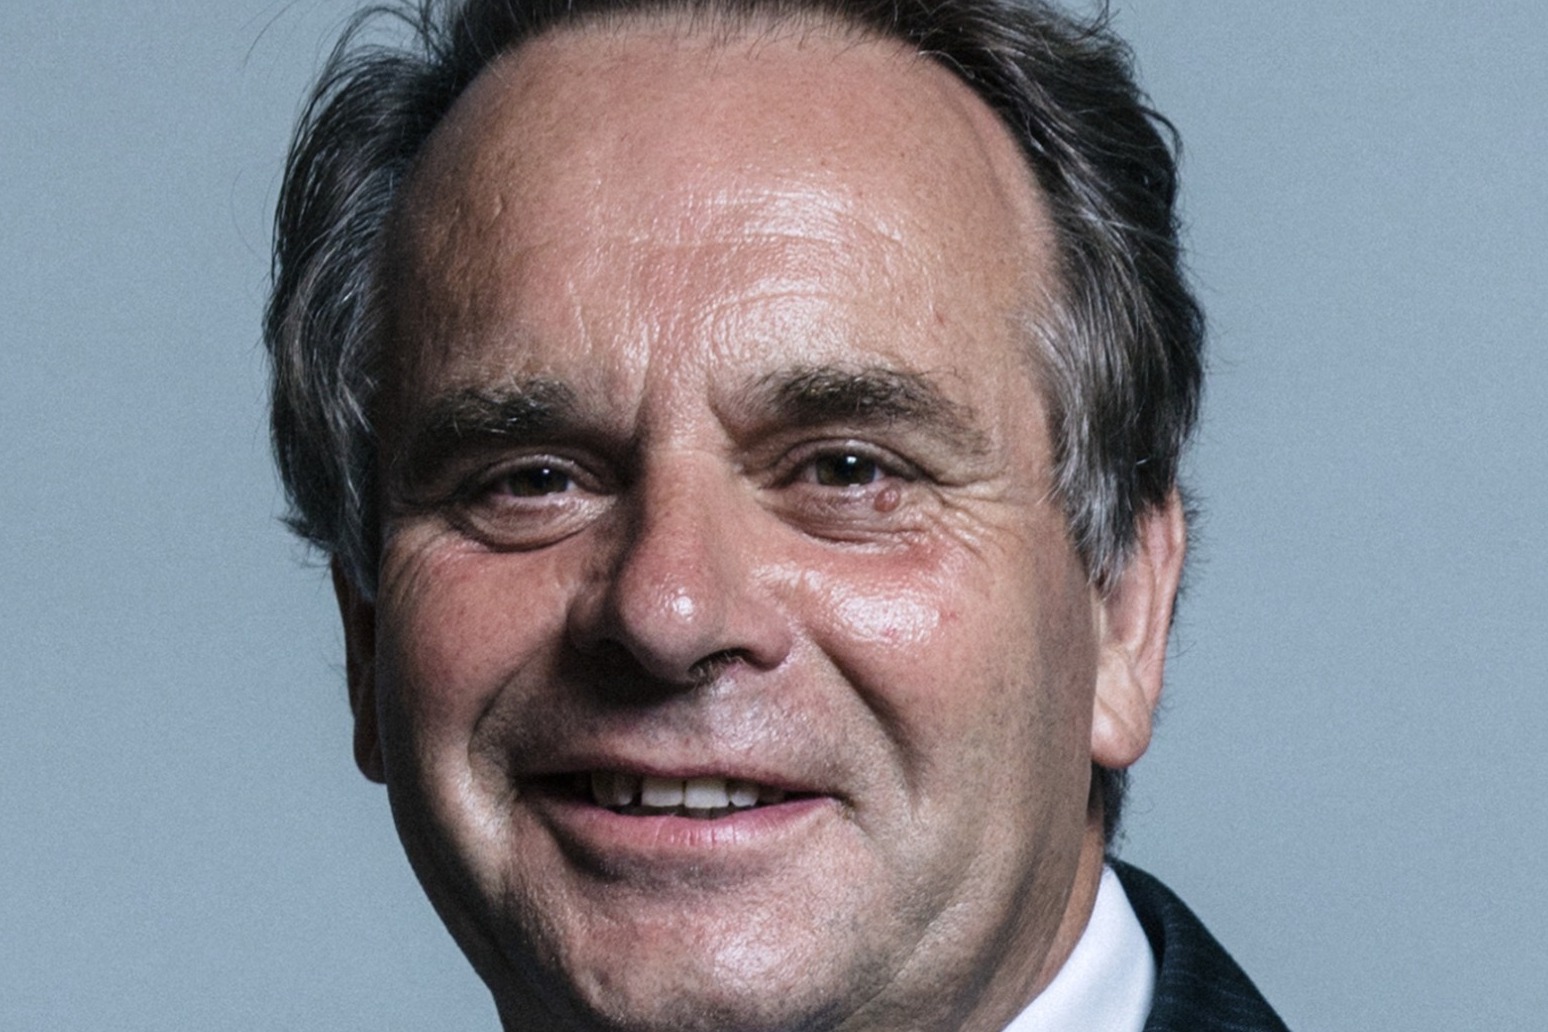 MP Neil Parish has Tory whip suspended over porn watching in Commons claims 